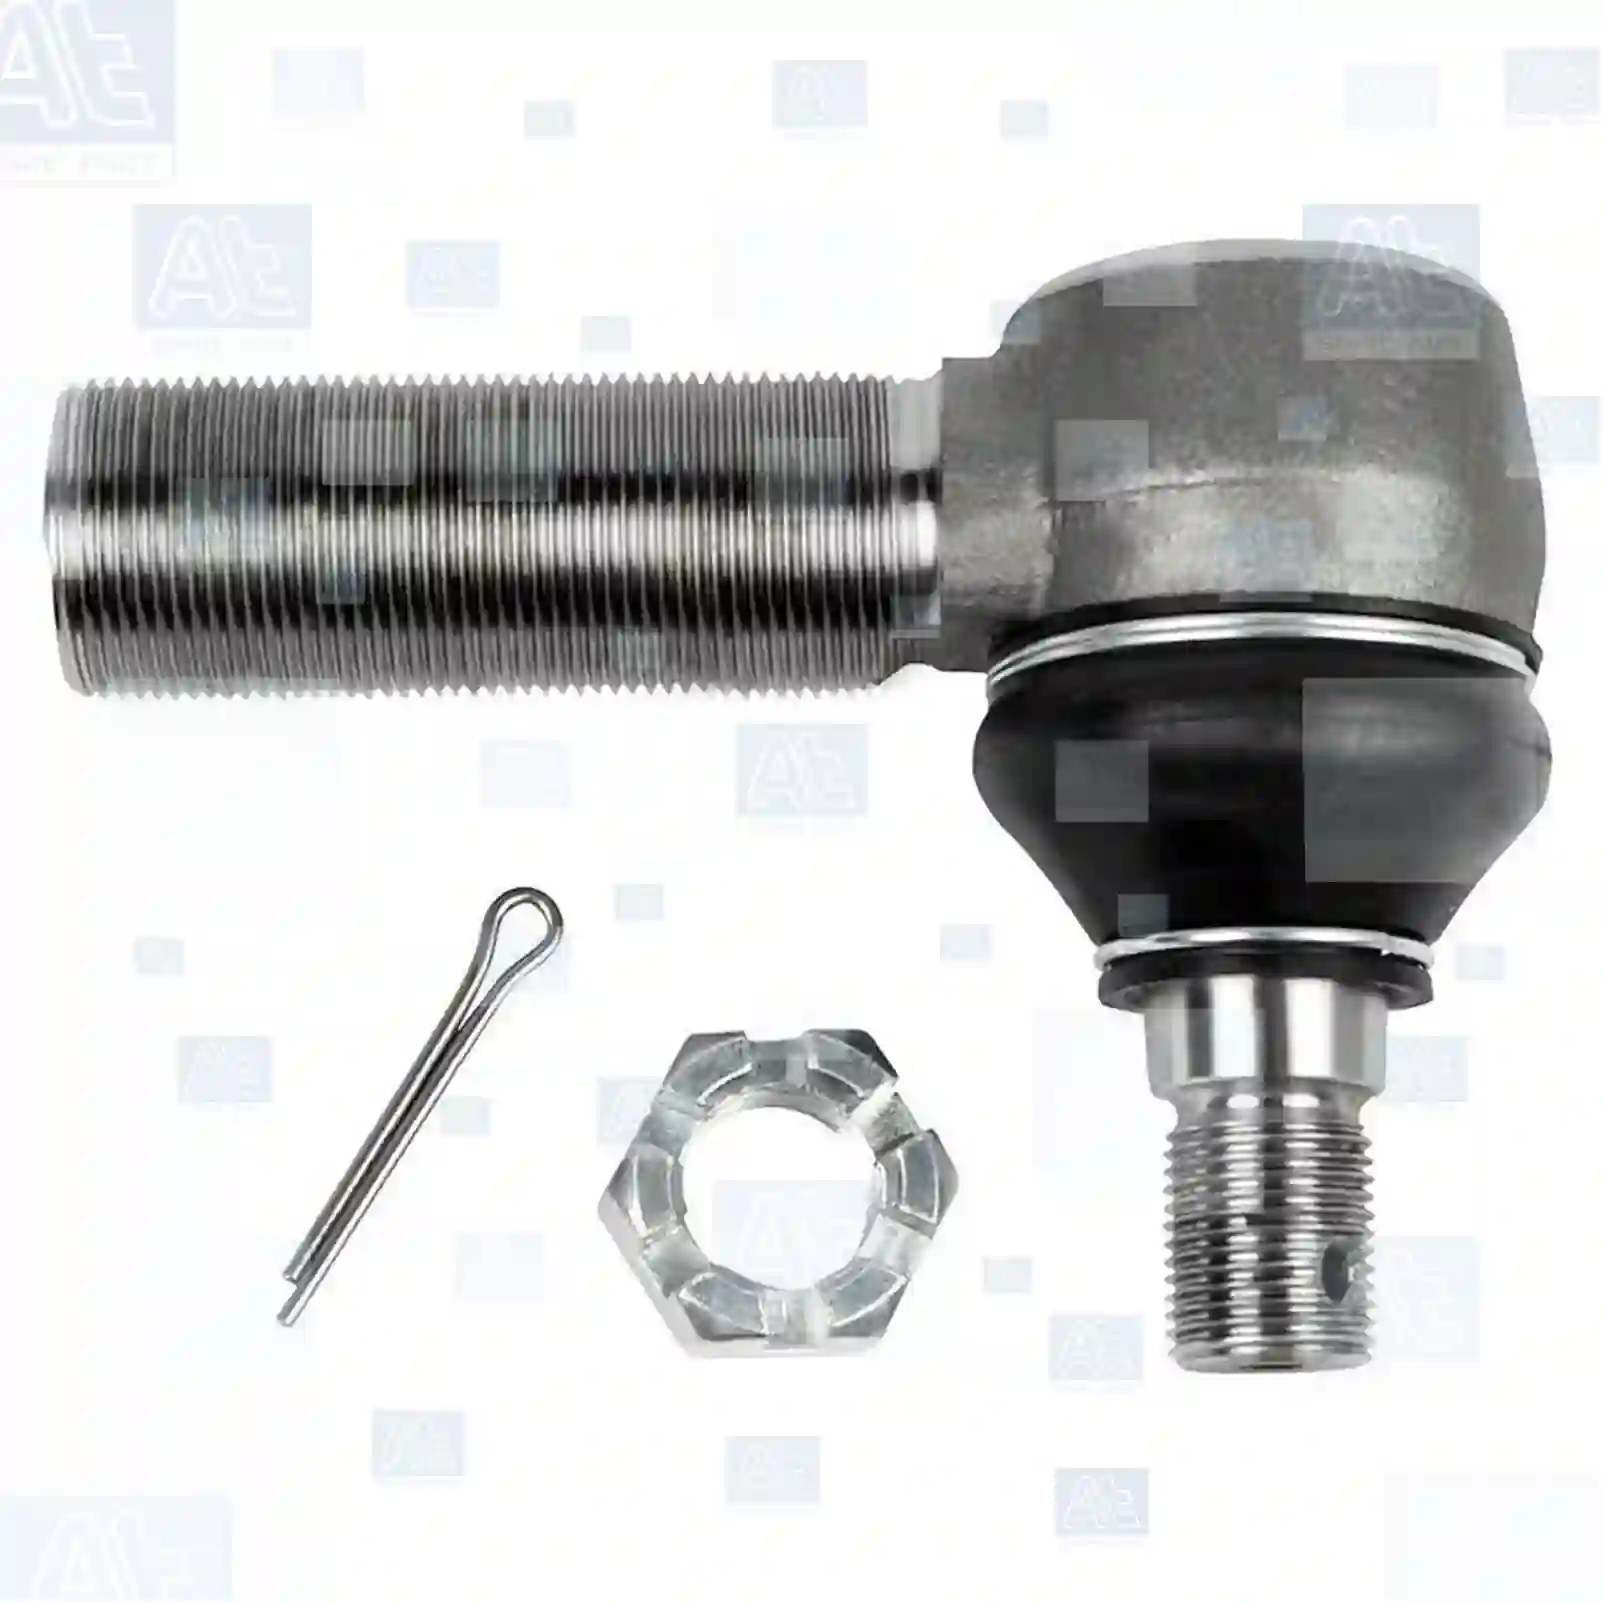 Ball joint, right hand thread, 77705369, 0100197, 0110197, 0607451, 0607453, 100197, 110197, 1228114, 1326864, 1373135, 607451, 607453, ACU9242, 387025960151, 004833825, 02966321, 02966635, 04833825, 04833825, 08193645, 08558533, 08582322, 2966321, 2966635, 42484886, 4833825, 4833825, 8193645, 8558533, 8582322, 81400004051, 81953016060, 81953016135, 81953016140, 81953016249, 81953016298, 81953016316, 81953016328, 81953016358, 0003301435, 0003301535, 0003307135, 0003309335, 0003309535, 0003382129, 0003383629, 0023301135, 3443307135, 120325701, 0003406242, 5000823987, 5001825687, 1517440, 1517444, 1698191, ZG40390-0008 ||  77705369 At Spare Part | Engine, Accelerator Pedal, Camshaft, Connecting Rod, Crankcase, Crankshaft, Cylinder Head, Engine Suspension Mountings, Exhaust Manifold, Exhaust Gas Recirculation, Filter Kits, Flywheel Housing, General Overhaul Kits, Engine, Intake Manifold, Oil Cleaner, Oil Cooler, Oil Filter, Oil Pump, Oil Sump, Piston & Liner, Sensor & Switch, Timing Case, Turbocharger, Cooling System, Belt Tensioner, Coolant Filter, Coolant Pipe, Corrosion Prevention Agent, Drive, Expansion Tank, Fan, Intercooler, Monitors & Gauges, Radiator, Thermostat, V-Belt / Timing belt, Water Pump, Fuel System, Electronical Injector Unit, Feed Pump, Fuel Filter, cpl., Fuel Gauge Sender,  Fuel Line, Fuel Pump, Fuel Tank, Injection Line Kit, Injection Pump, Exhaust System, Clutch & Pedal, Gearbox, Propeller Shaft, Axles, Brake System, Hubs & Wheels, Suspension, Leaf Spring, Universal Parts / Accessories, Steering, Electrical System, Cabin Ball joint, right hand thread, 77705369, 0100197, 0110197, 0607451, 0607453, 100197, 110197, 1228114, 1326864, 1373135, 607451, 607453, ACU9242, 387025960151, 004833825, 02966321, 02966635, 04833825, 04833825, 08193645, 08558533, 08582322, 2966321, 2966635, 42484886, 4833825, 4833825, 8193645, 8558533, 8582322, 81400004051, 81953016060, 81953016135, 81953016140, 81953016249, 81953016298, 81953016316, 81953016328, 81953016358, 0003301435, 0003301535, 0003307135, 0003309335, 0003309535, 0003382129, 0003383629, 0023301135, 3443307135, 120325701, 0003406242, 5000823987, 5001825687, 1517440, 1517444, 1698191, ZG40390-0008 ||  77705369 At Spare Part | Engine, Accelerator Pedal, Camshaft, Connecting Rod, Crankcase, Crankshaft, Cylinder Head, Engine Suspension Mountings, Exhaust Manifold, Exhaust Gas Recirculation, Filter Kits, Flywheel Housing, General Overhaul Kits, Engine, Intake Manifold, Oil Cleaner, Oil Cooler, Oil Filter, Oil Pump, Oil Sump, Piston & Liner, Sensor & Switch, Timing Case, Turbocharger, Cooling System, Belt Tensioner, Coolant Filter, Coolant Pipe, Corrosion Prevention Agent, Drive, Expansion Tank, Fan, Intercooler, Monitors & Gauges, Radiator, Thermostat, V-Belt / Timing belt, Water Pump, Fuel System, Electronical Injector Unit, Feed Pump, Fuel Filter, cpl., Fuel Gauge Sender,  Fuel Line, Fuel Pump, Fuel Tank, Injection Line Kit, Injection Pump, Exhaust System, Clutch & Pedal, Gearbox, Propeller Shaft, Axles, Brake System, Hubs & Wheels, Suspension, Leaf Spring, Universal Parts / Accessories, Steering, Electrical System, Cabin